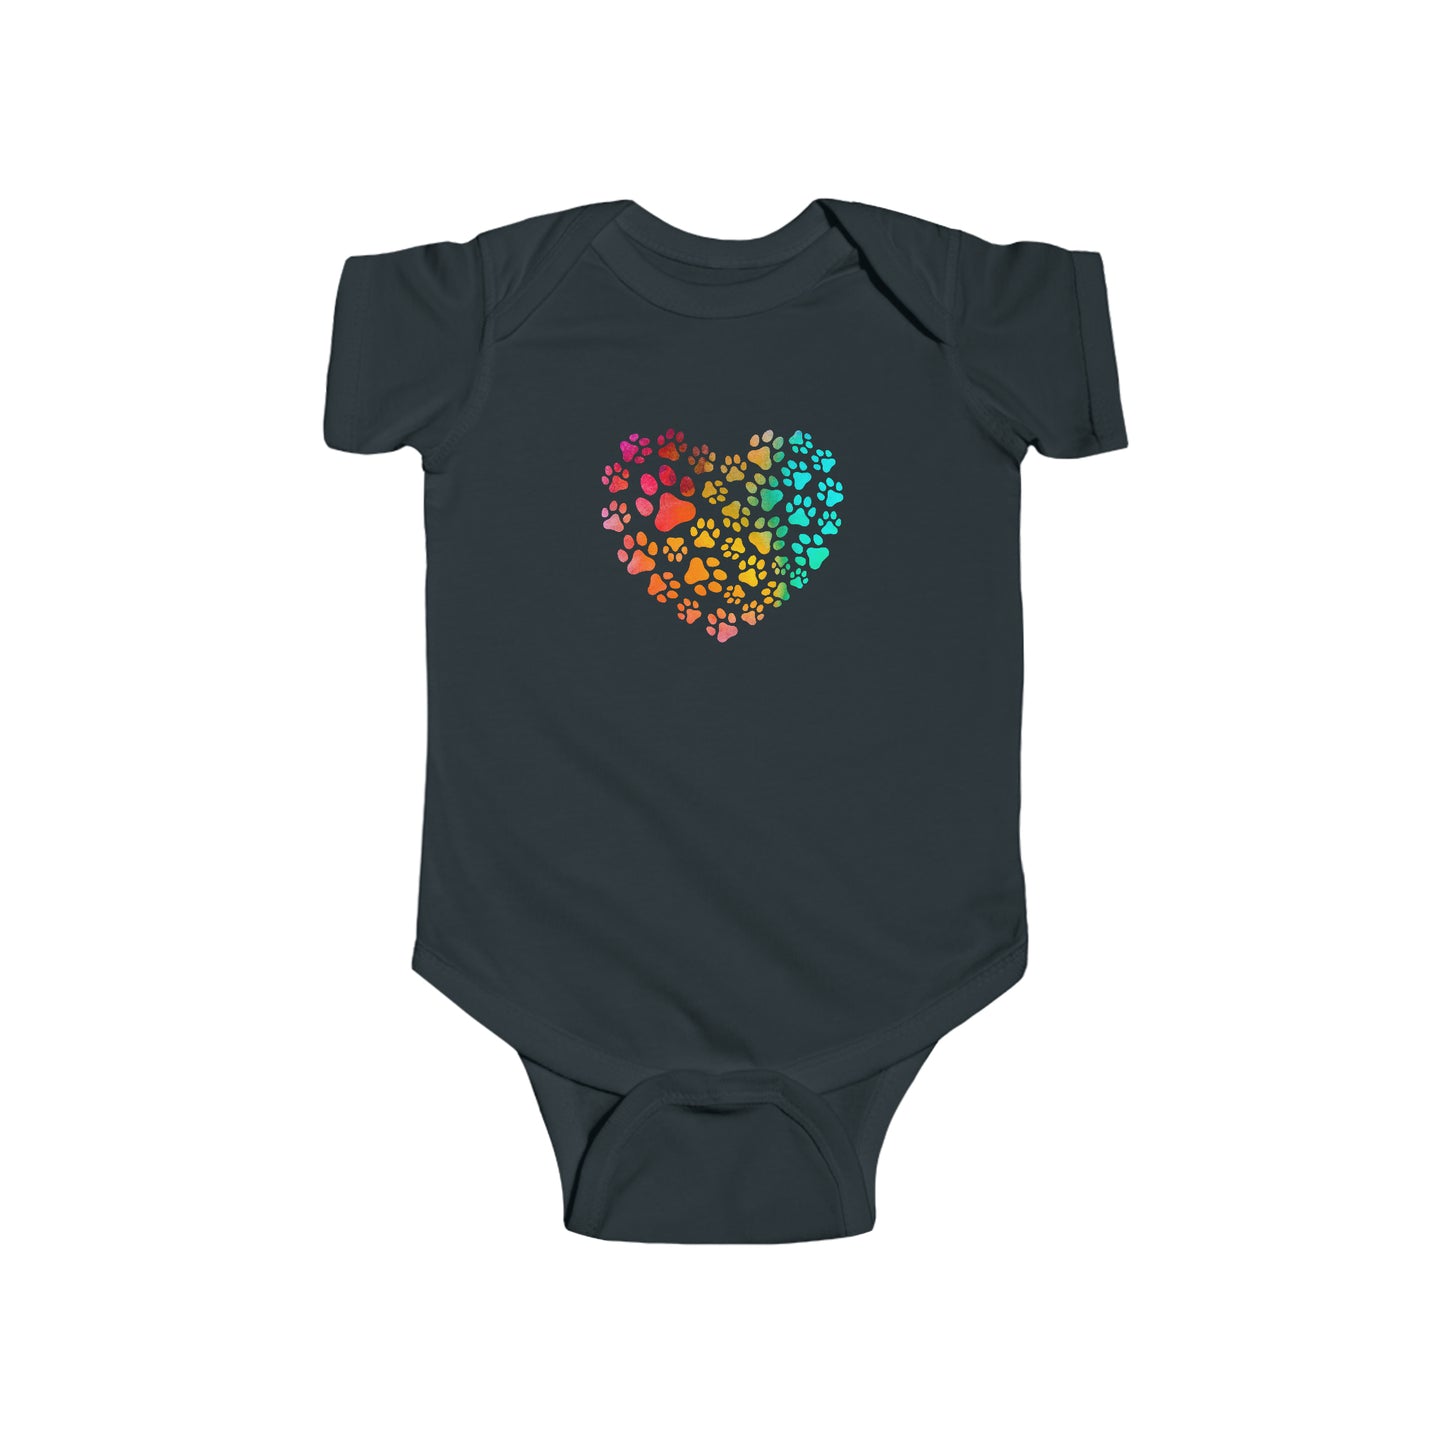 Art, Colorful, Love, Dog Paw- Baby, Infant, Toddler, Soft Cotton, Onesie